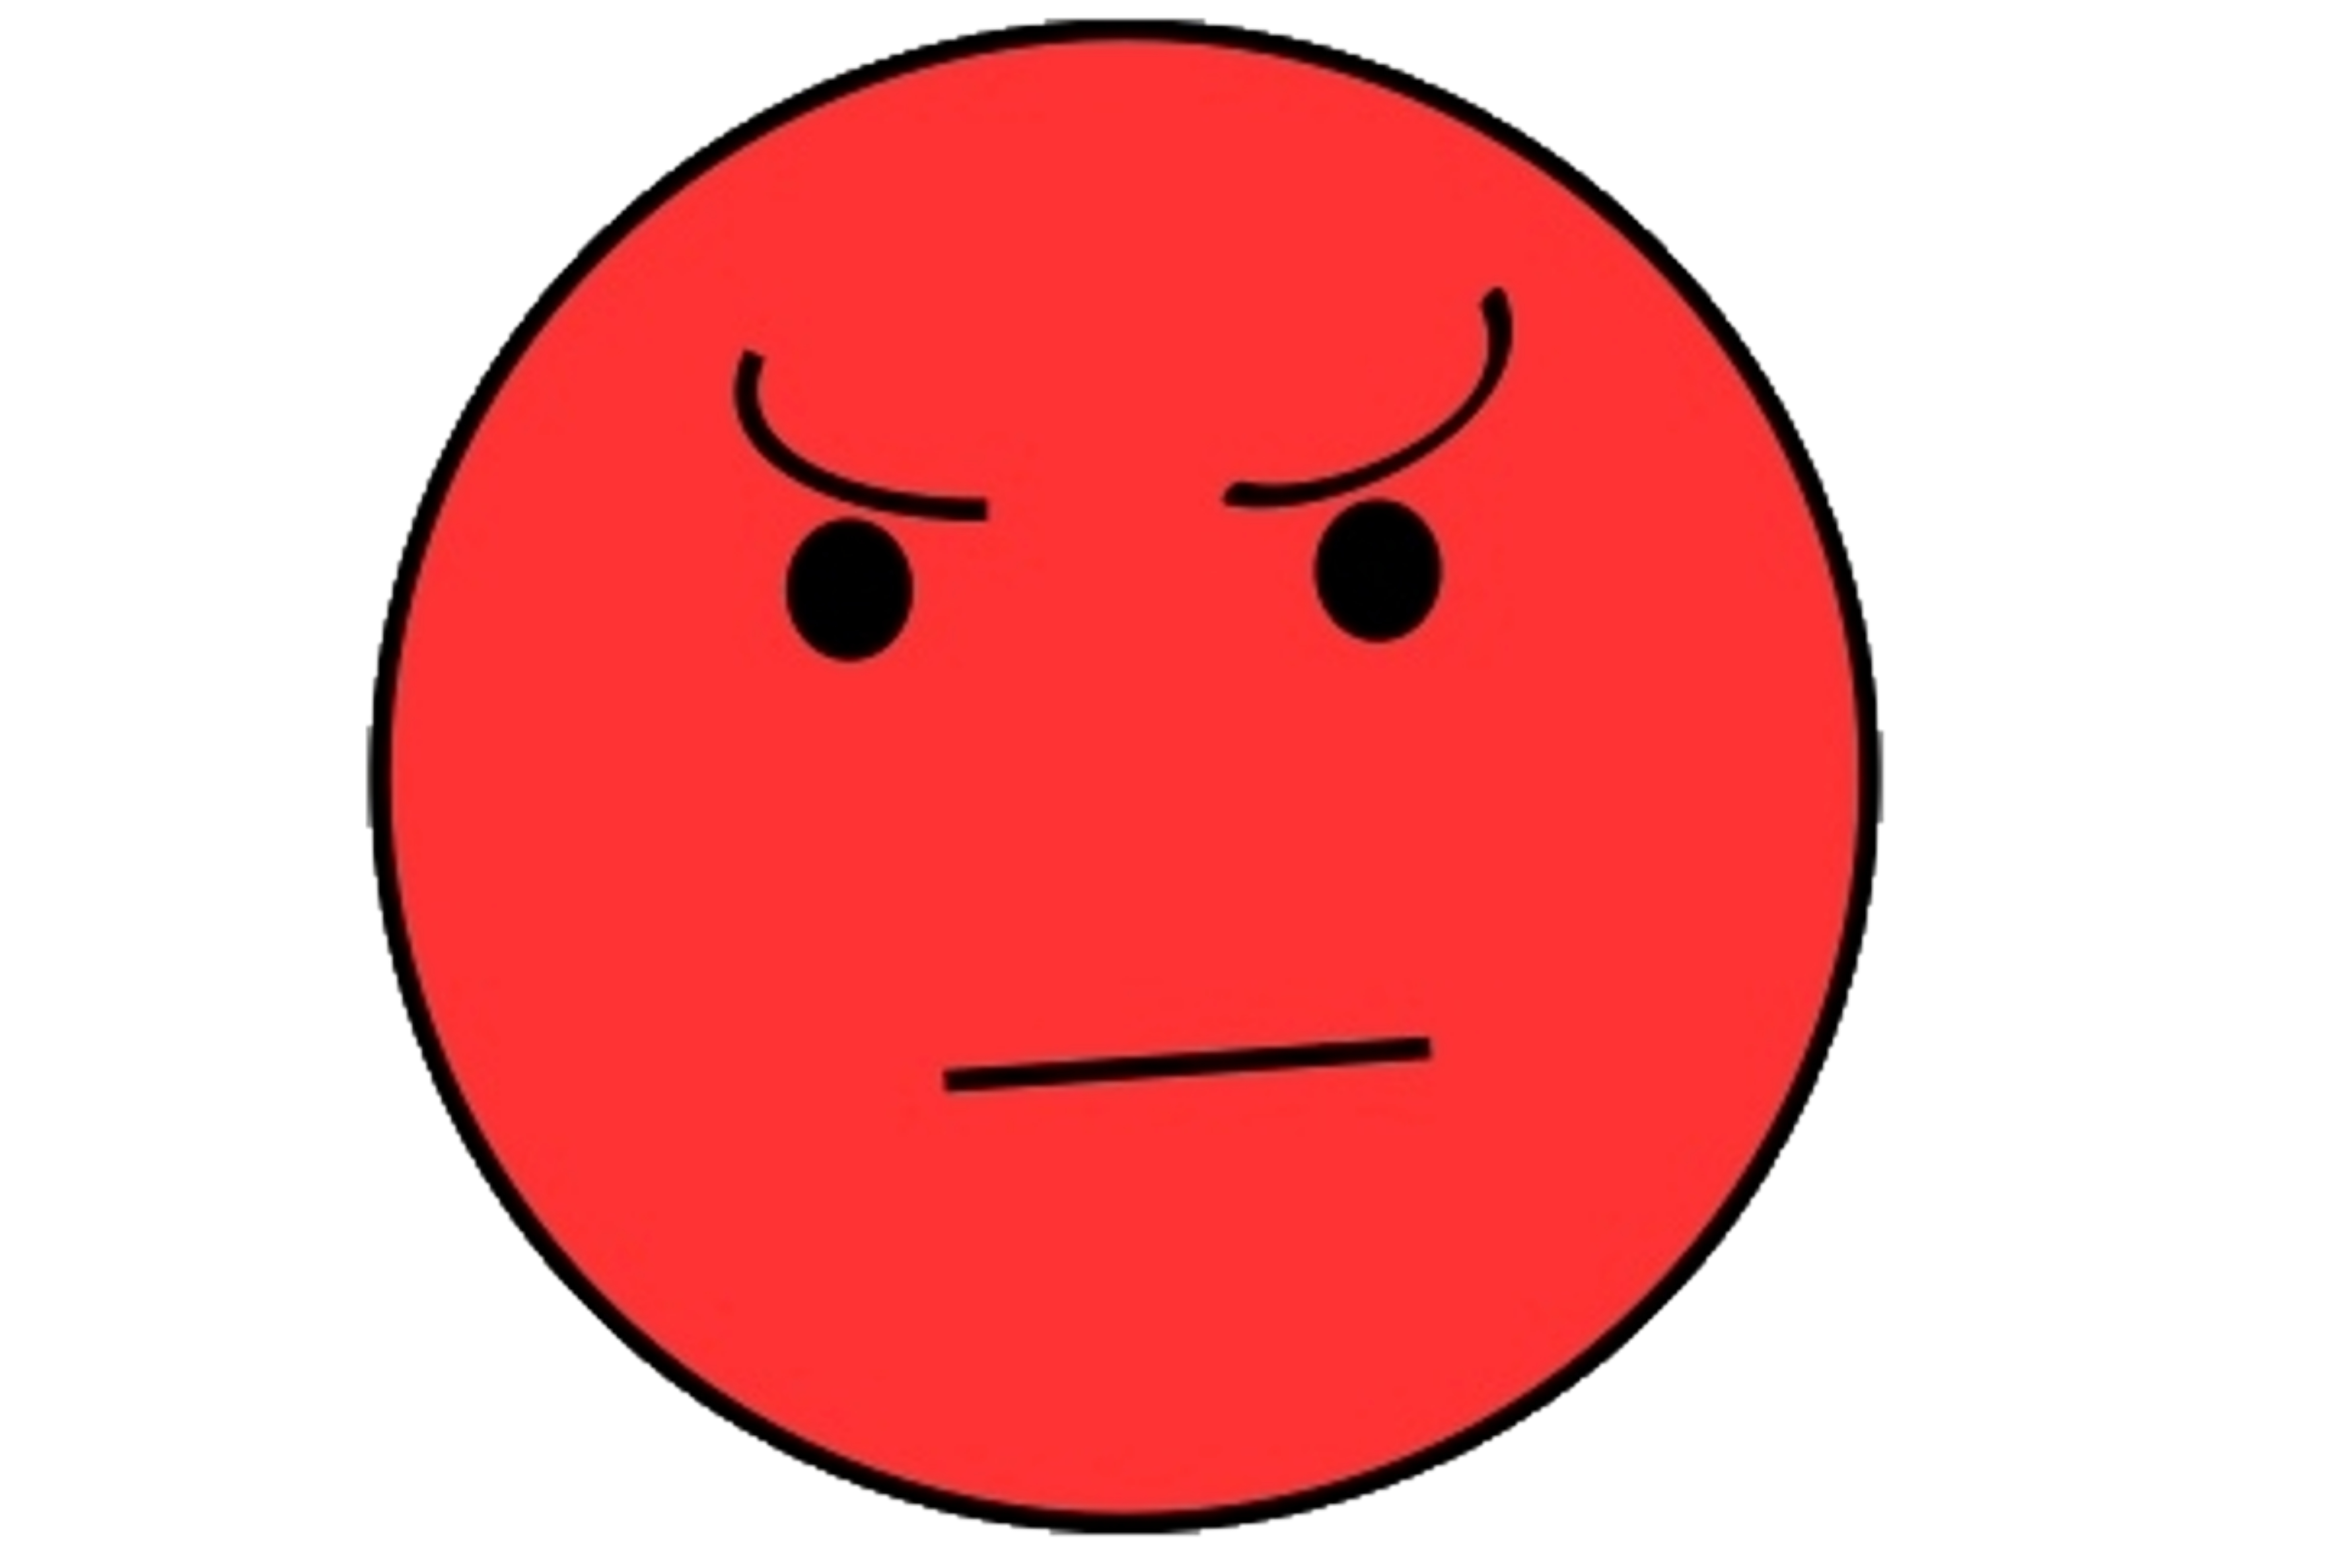 Image Of Angry Face - ClipArt Best